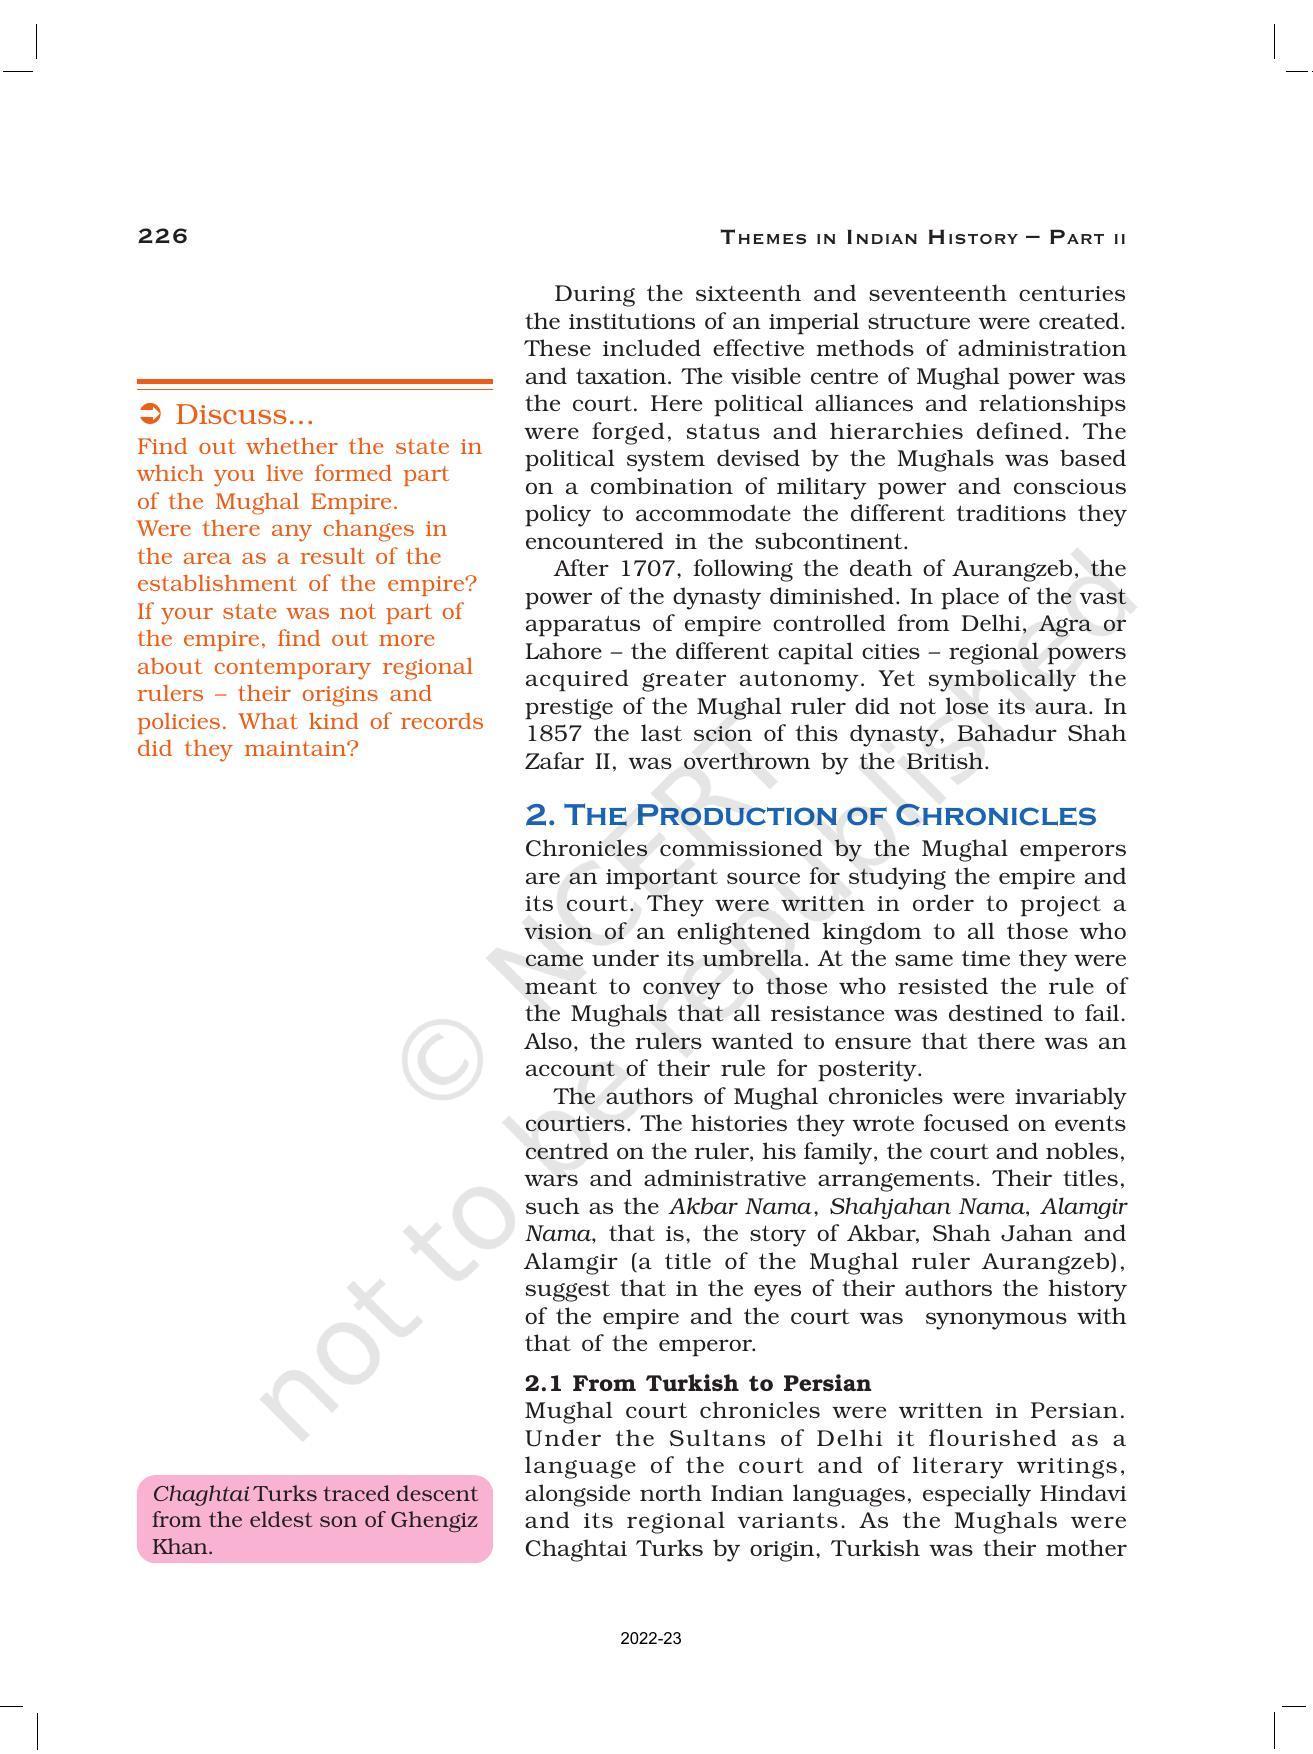 NCERT Book for Class 12 History (Part-II) Chapter 9 Kings and Chronicles - Page 3